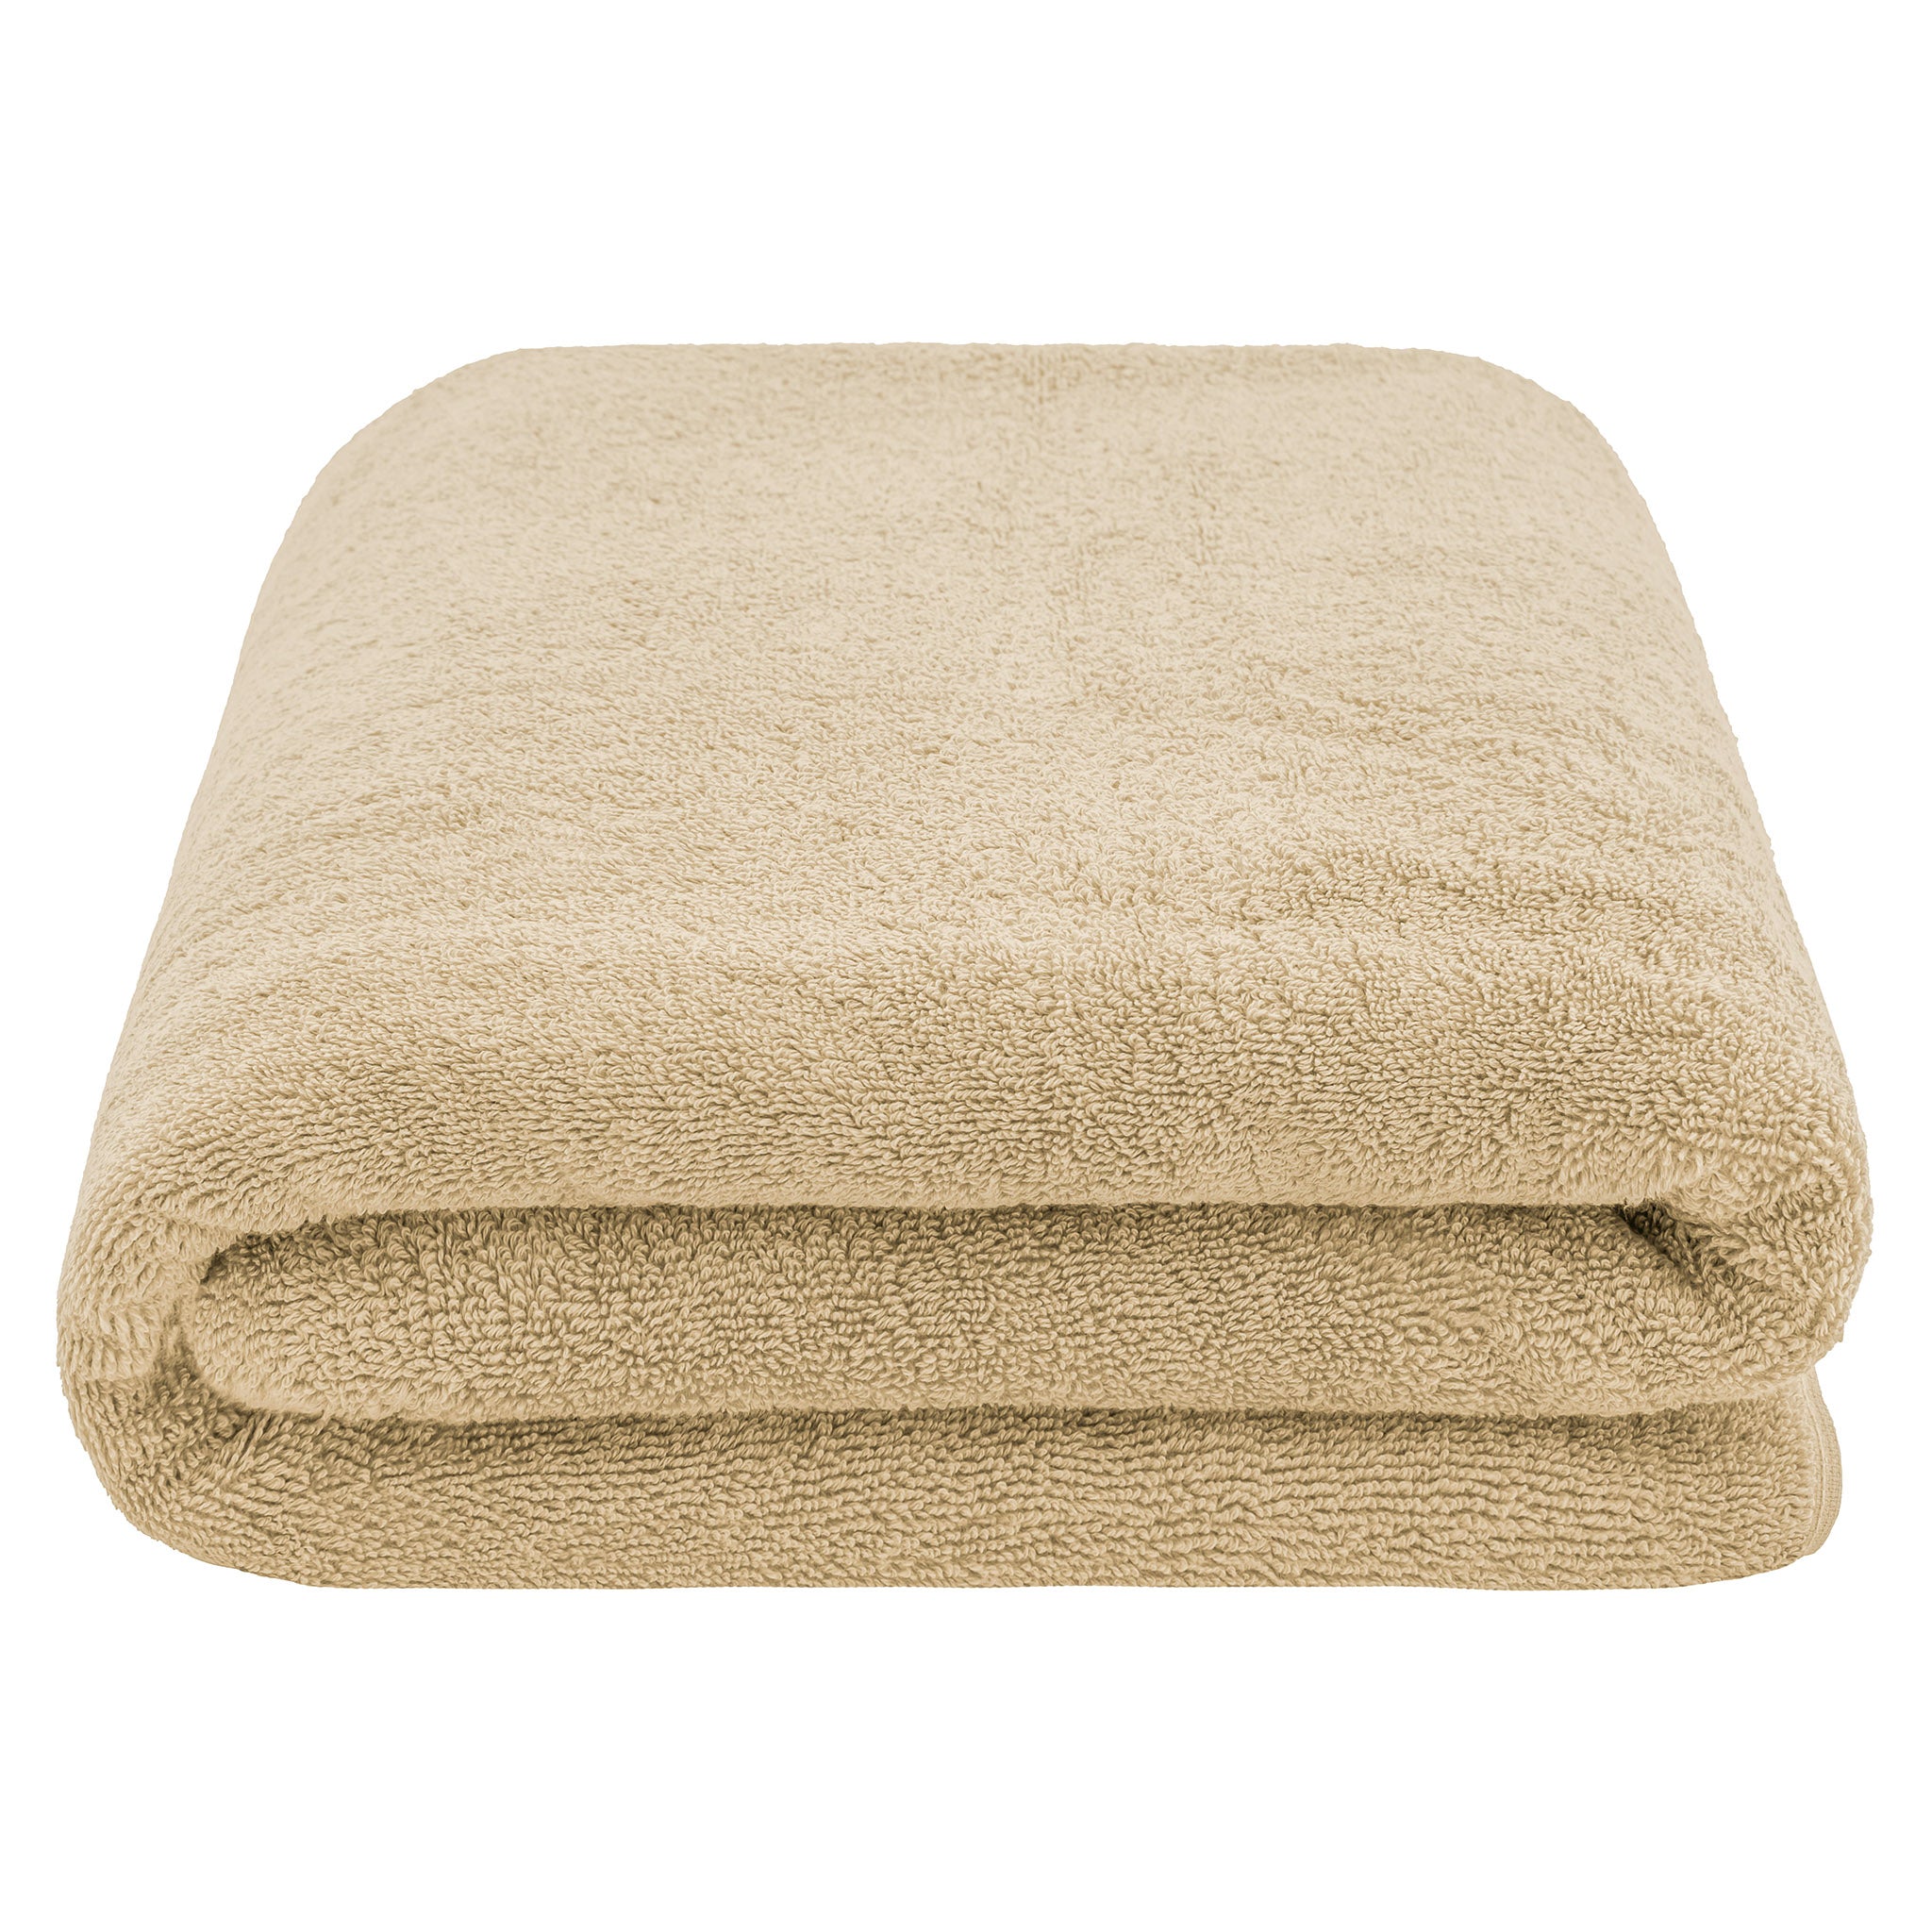 American Soft Linen Bath Sheet 40x80 Inch 100% Cotton Extra Large Oversized Bath  Towel Sheet - Taupe 